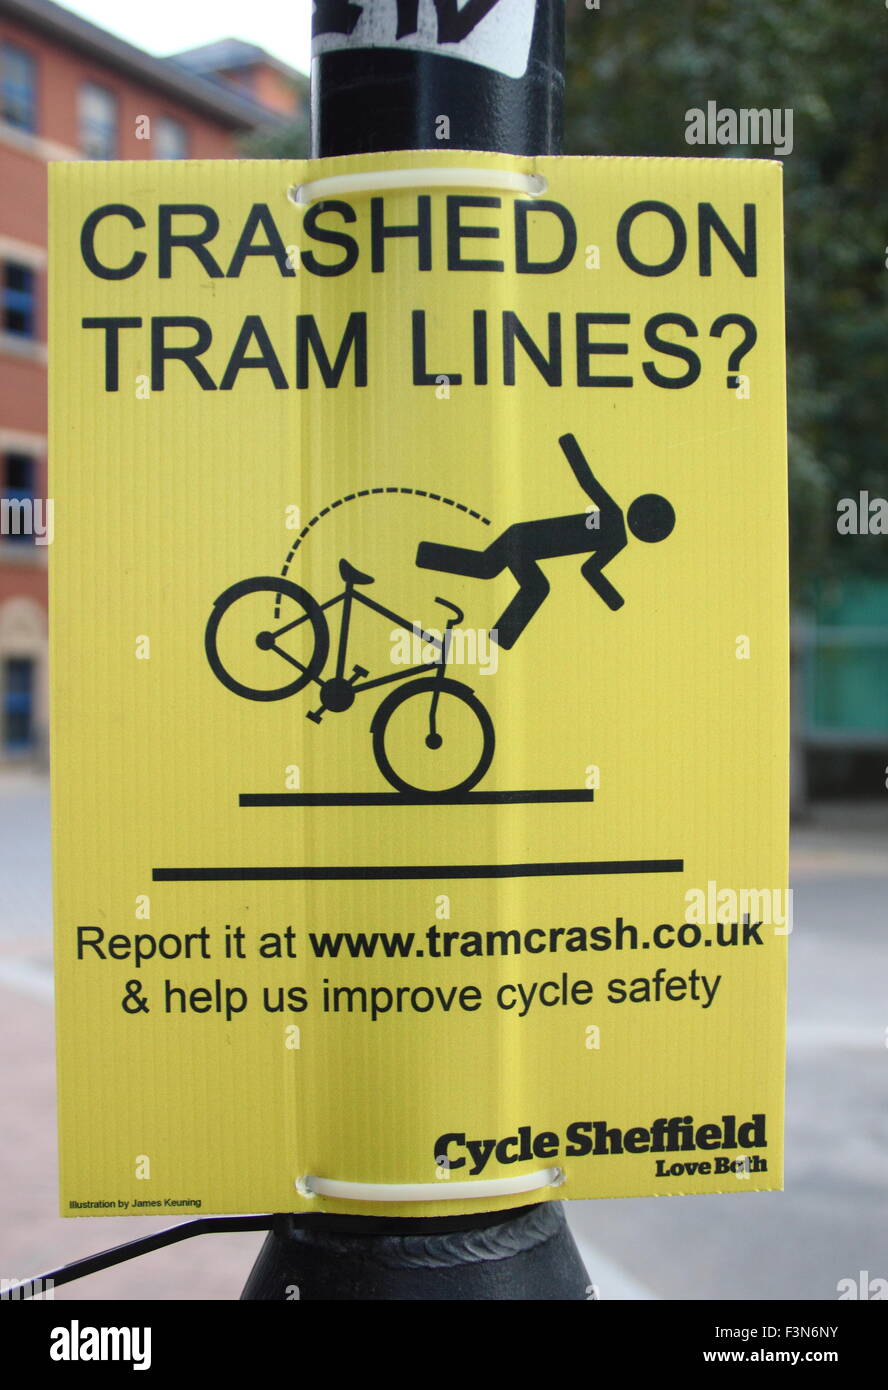 A notice in Sheffield city centreencourages cyclists to report collisions with tramlines to www.tramcrash.co.uk - Yorkshire, UK Stock Photo